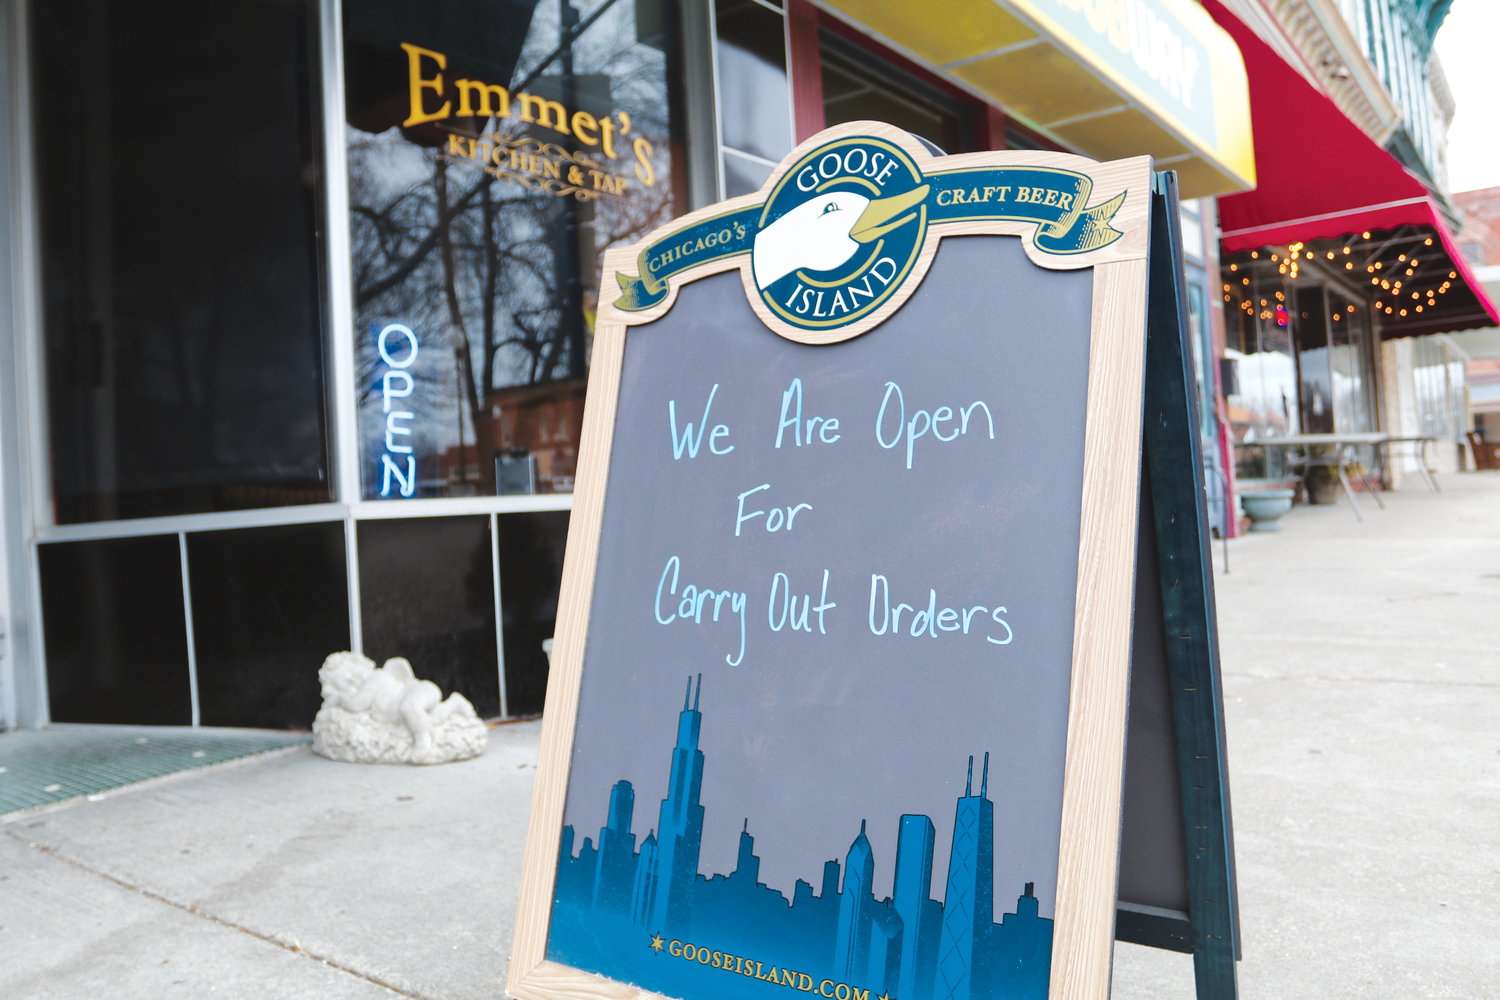 A sign of the time in front of Emmet’s Kitchen & Tap advertises the restaurant is still open for take-out and delivery orders.